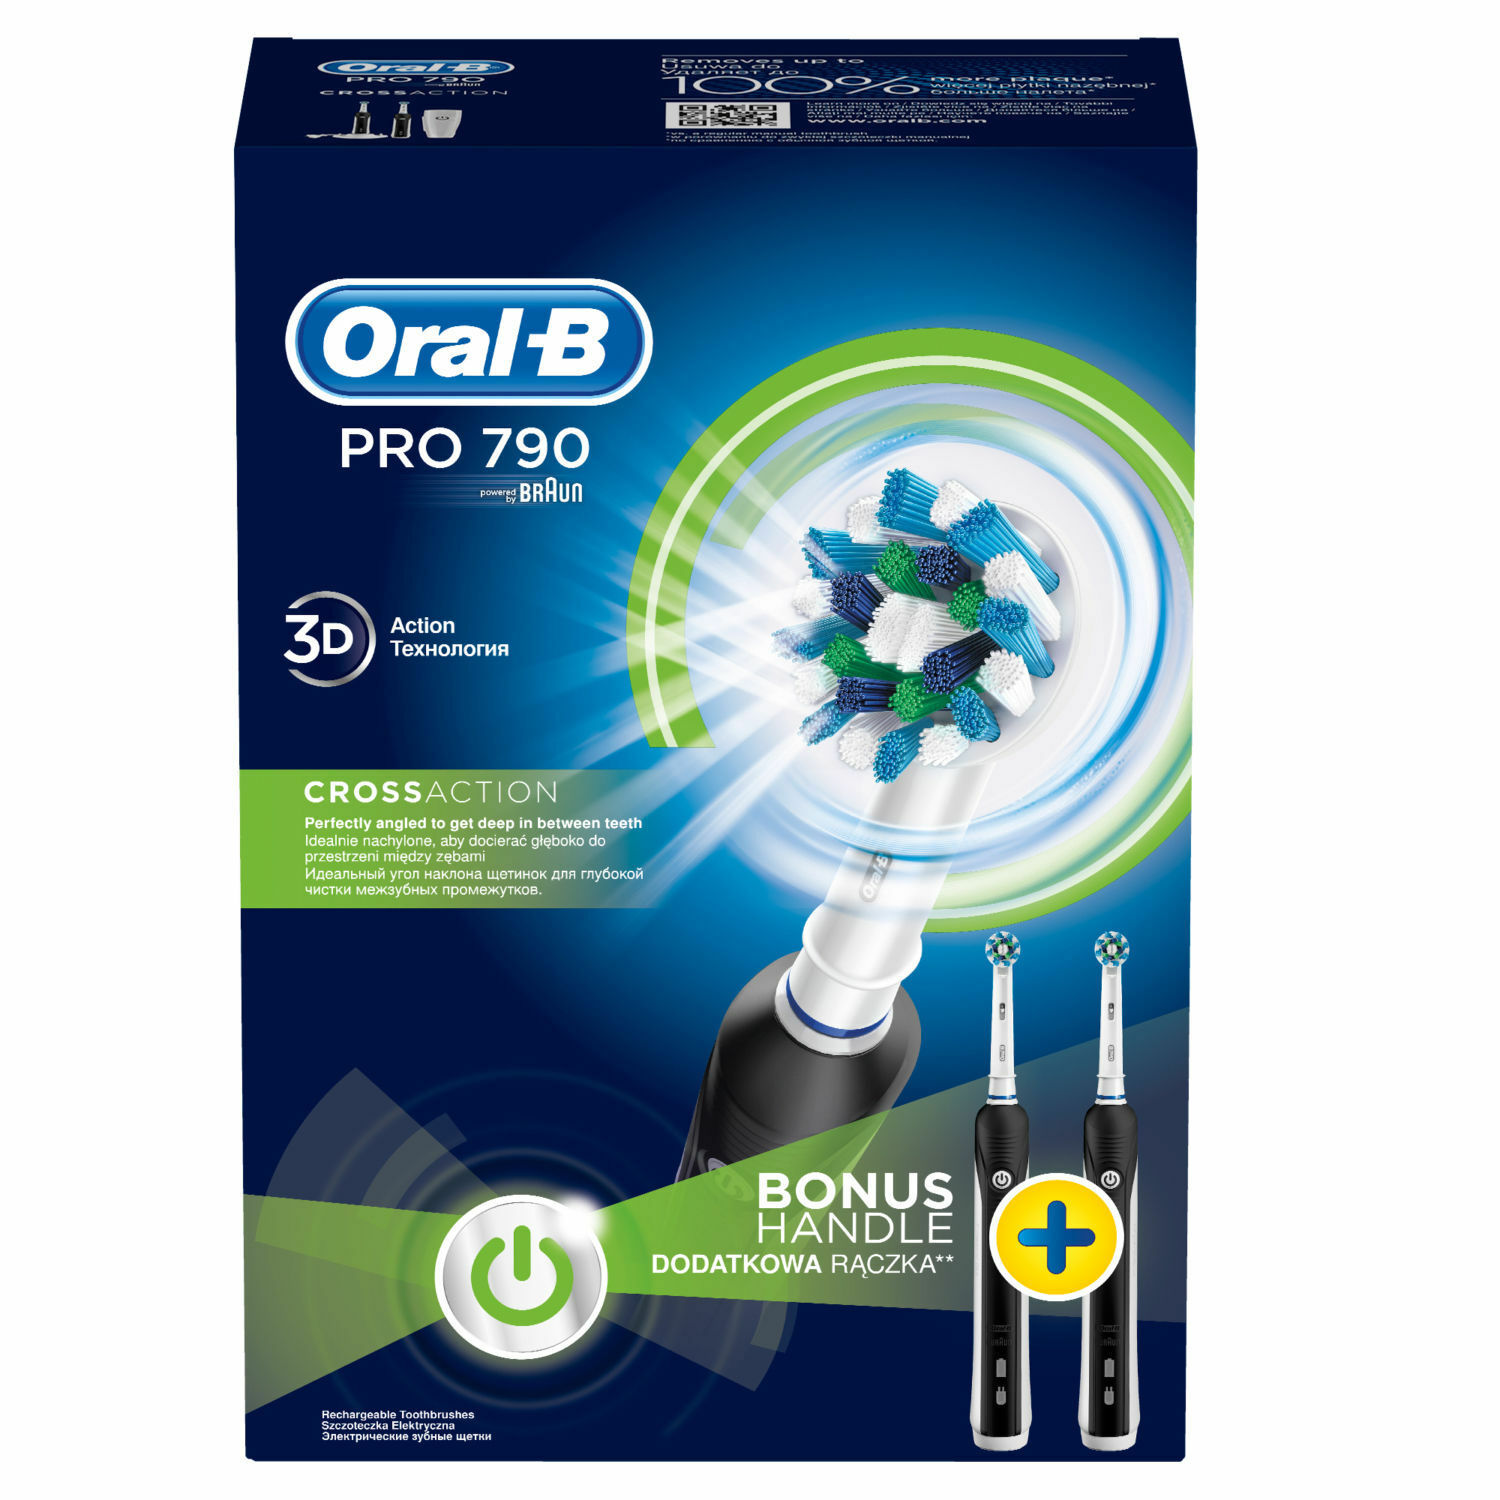 stikstof verachten Rationeel Price history & Review on ORAL-B Pro 790 Crossaction Toothbrush - Duo  Advantage Package - 2 Handles SALES | AliExpress Seller - ATLAS Store |  Alitools.io